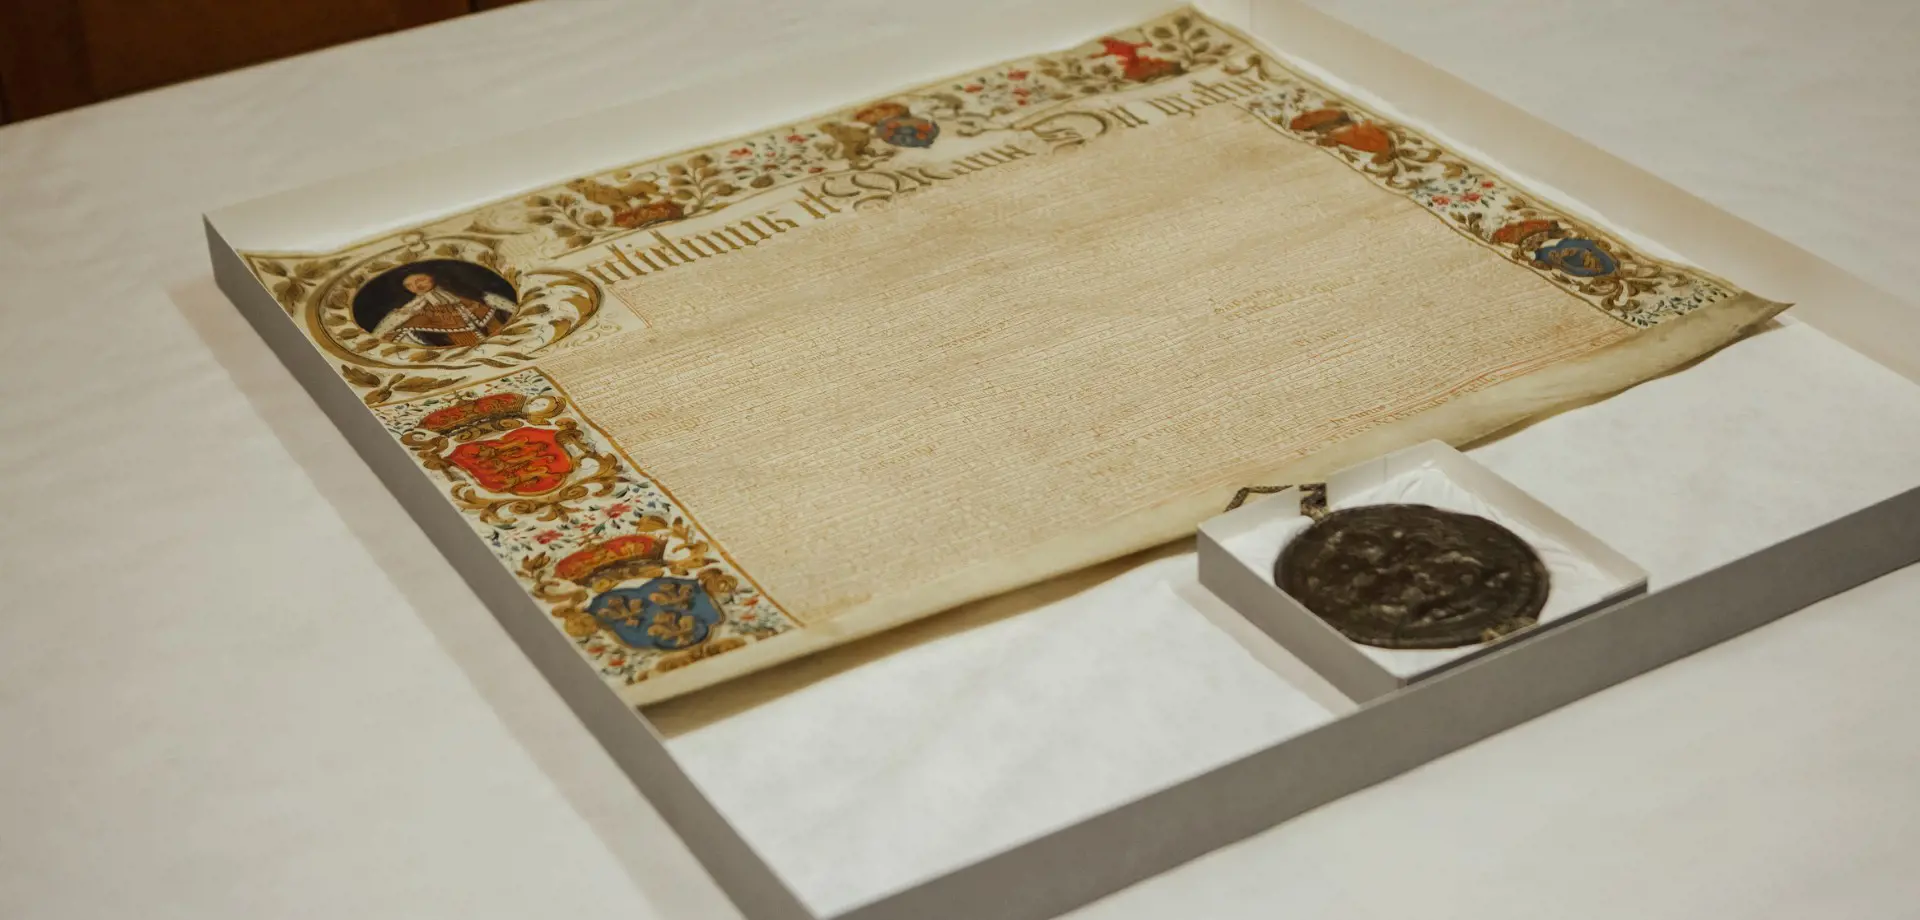 Large parchment with brightly coloured illustrations around the edges, including a portrait of William, dense writing and a large dark red round seal hanging from the bottom